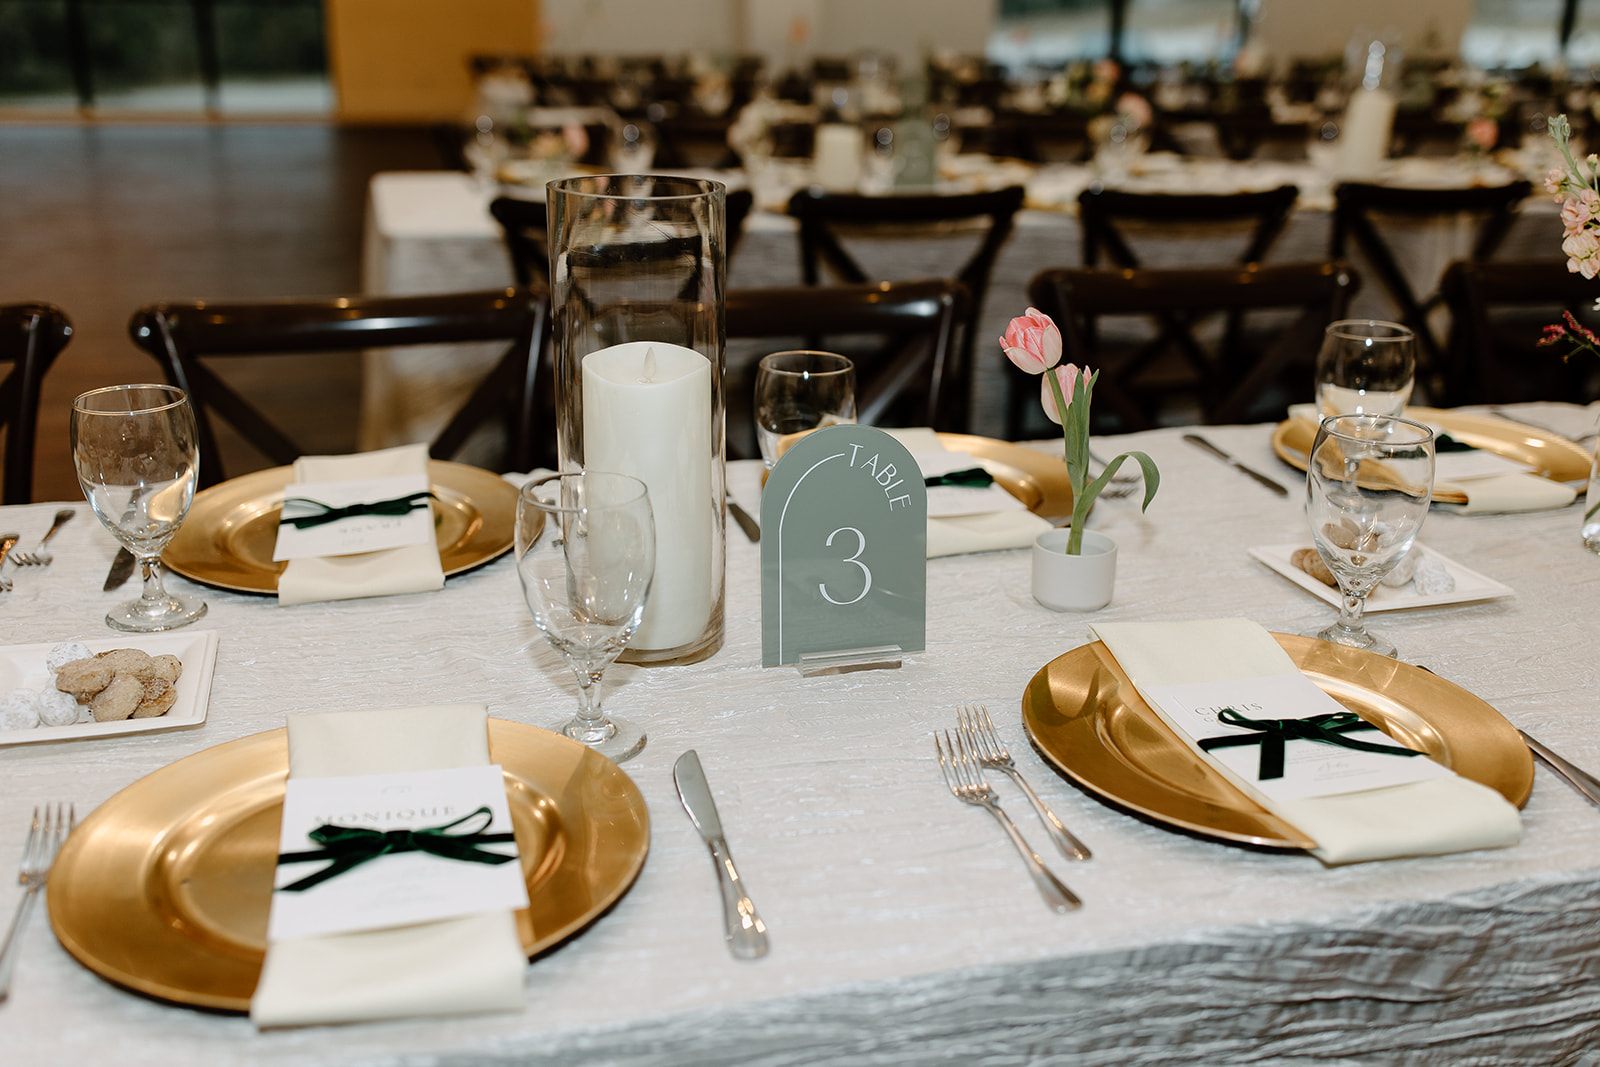 Wedding table scape